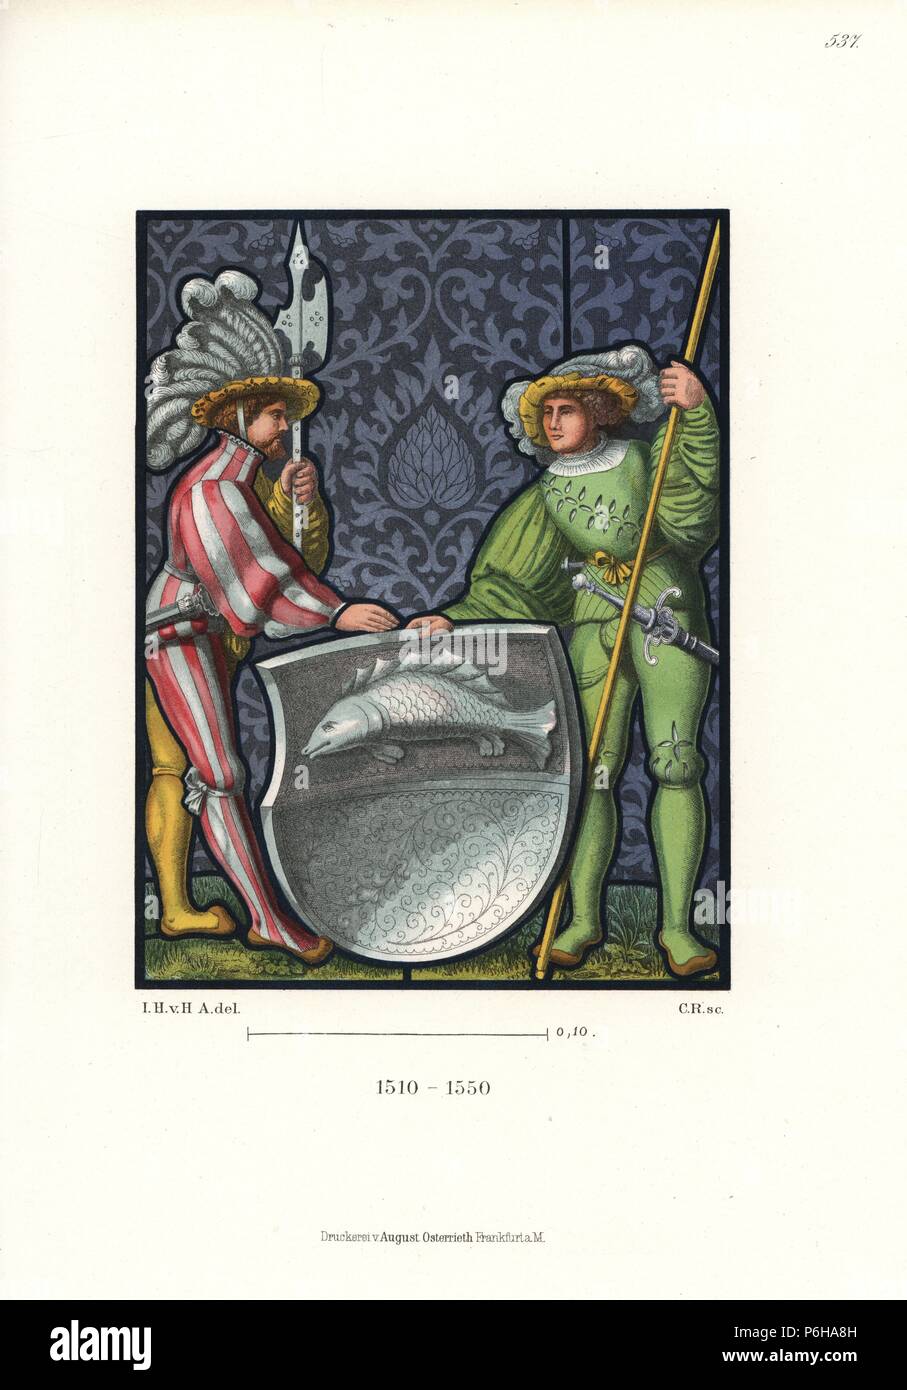 Two Swiss knights in battle garb holding a heraldic shield with image of a fish, halberd and lance, 1510-1550. They wear quilted doublets, breeches, stockings, codpiece and garters. From a stained glass in Nilkheim bei Aschaffenburg. Chromolithograph from Hefner-Alteneck's 'Costumes, Artworks and Appliances from the Middle Ages to the 17th Century,' Frankfurt, 1889. Illustration by Dr. Jakob Heinrich von Hefner-Alteneck, lithographed by C. Regnier. Dr. Hefner-Alteneck (1811-1903) was a German museum curator, archaeologist, art historian, illustrator and etcher. Stock Photo